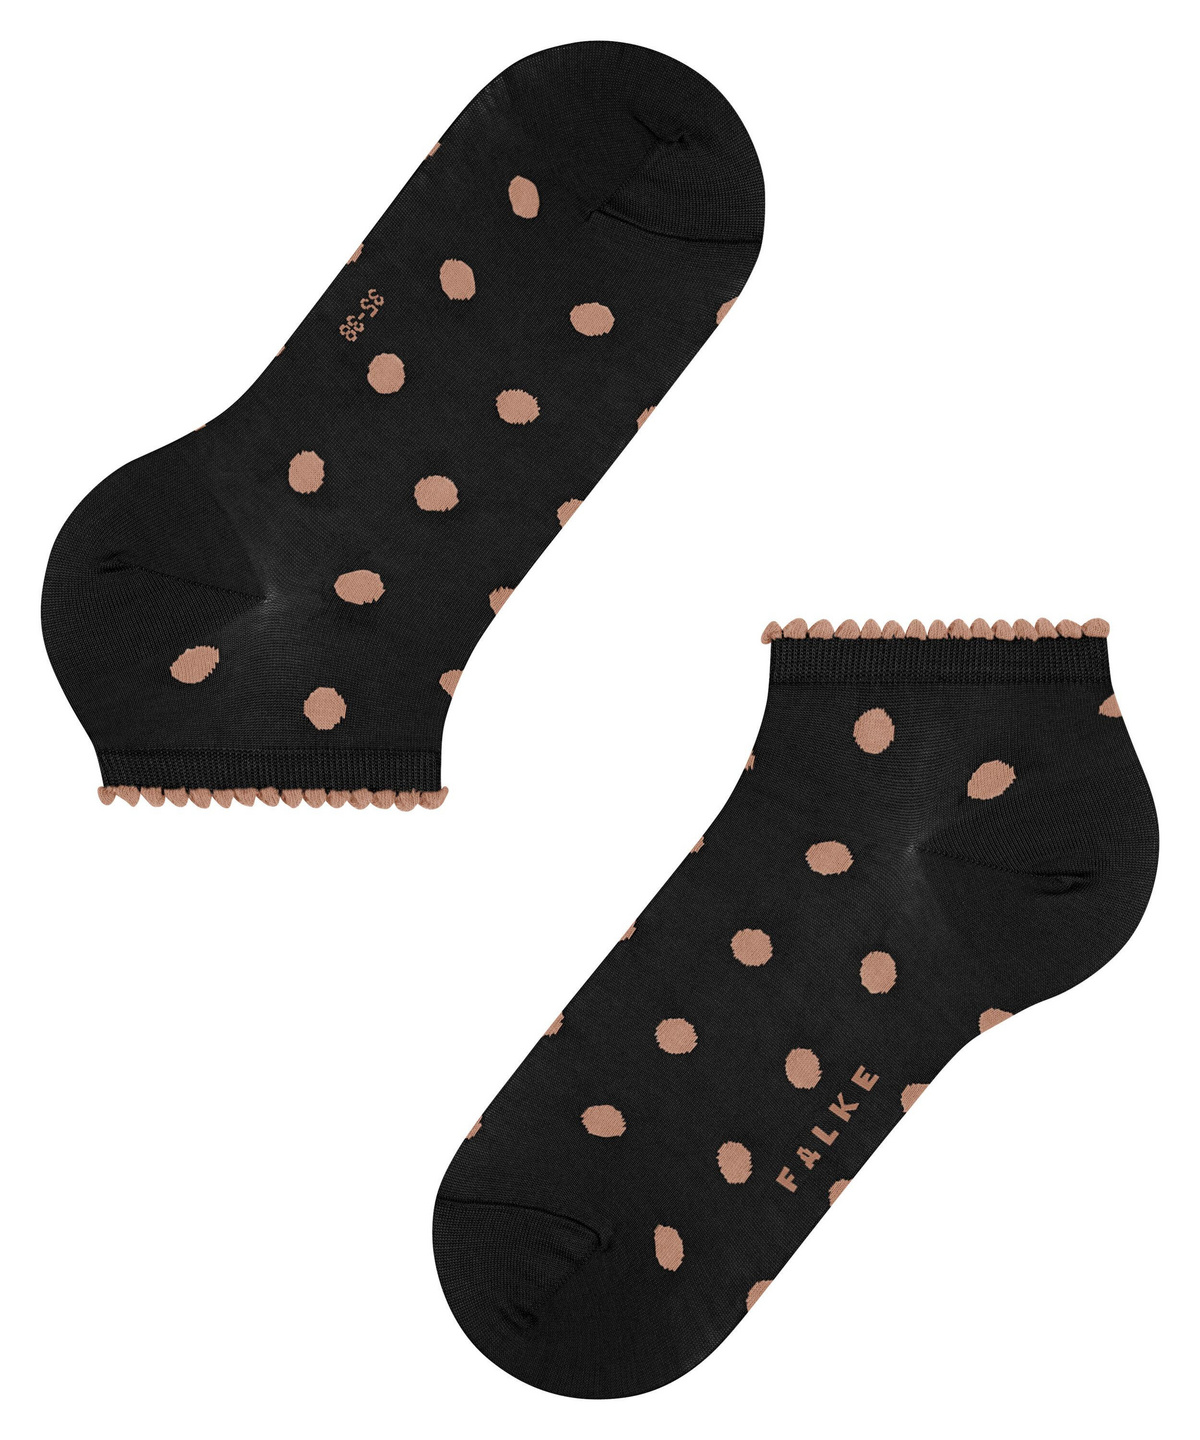 size 35-38 euro-star Ladies Aily Sock